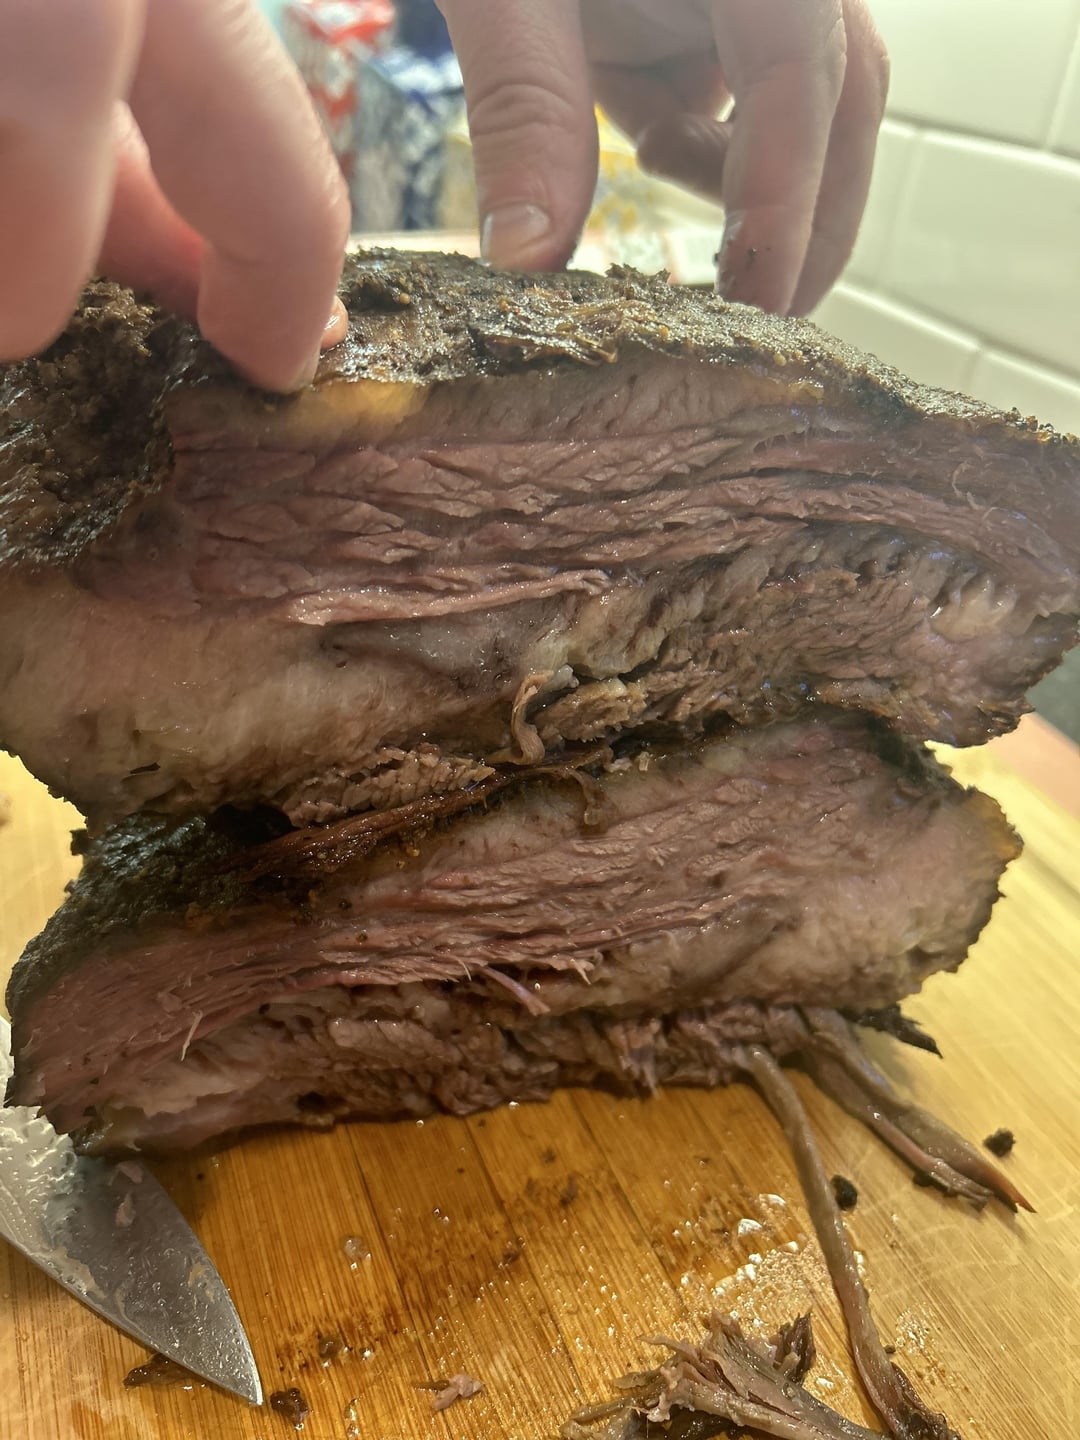 First Brisket on the BGE 4 hours unwrapped at 275 to 155 internal, 11